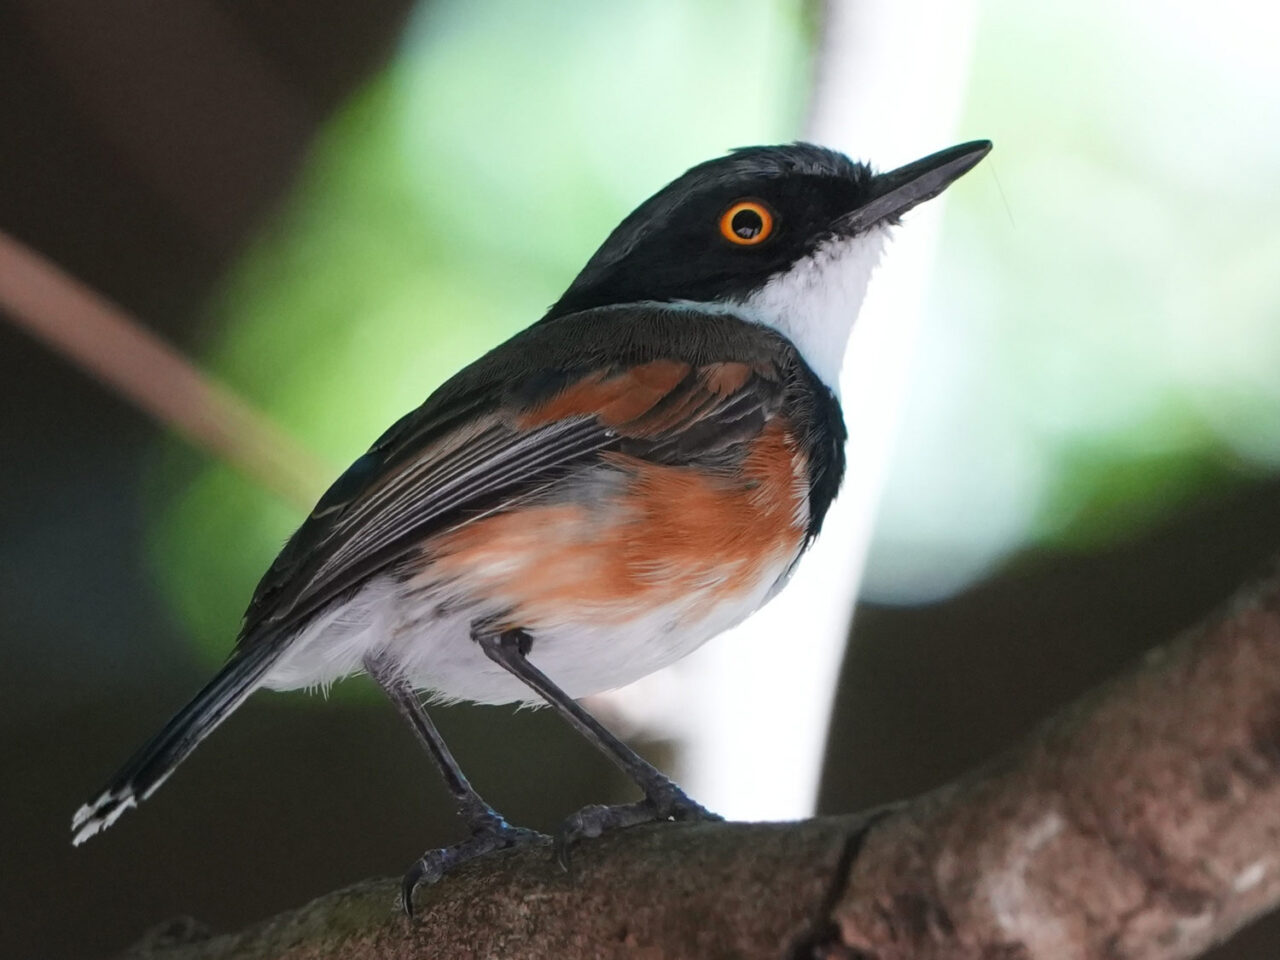 A small gray, brown and white bird with a reddish eye.